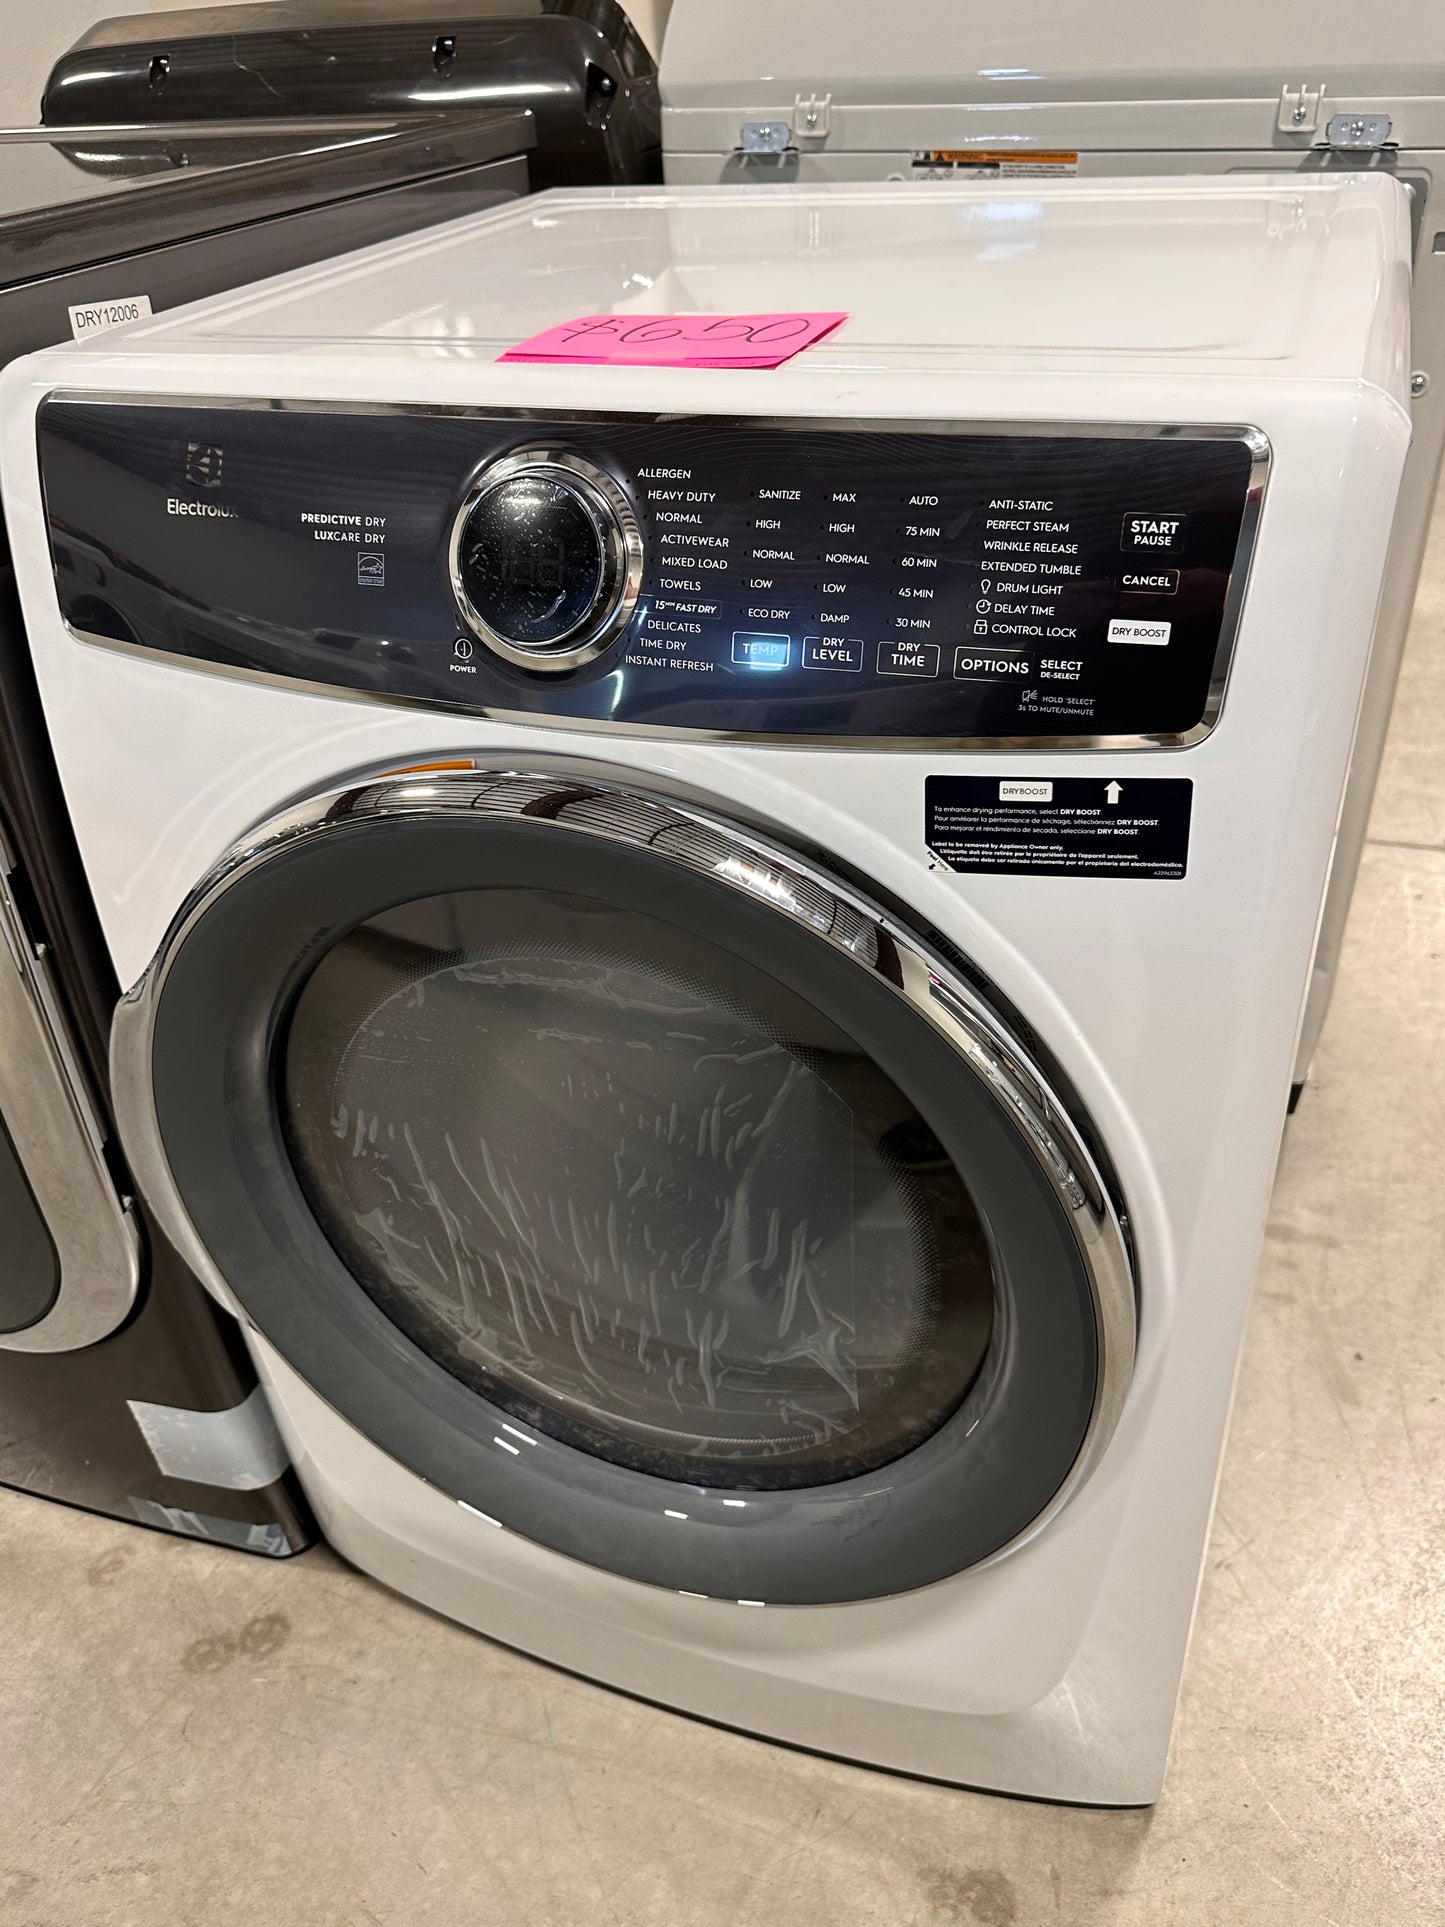 NEW 8 CU FT ELECTROLUX ELECTRIC DRYER WITH STEAM - DRY12016